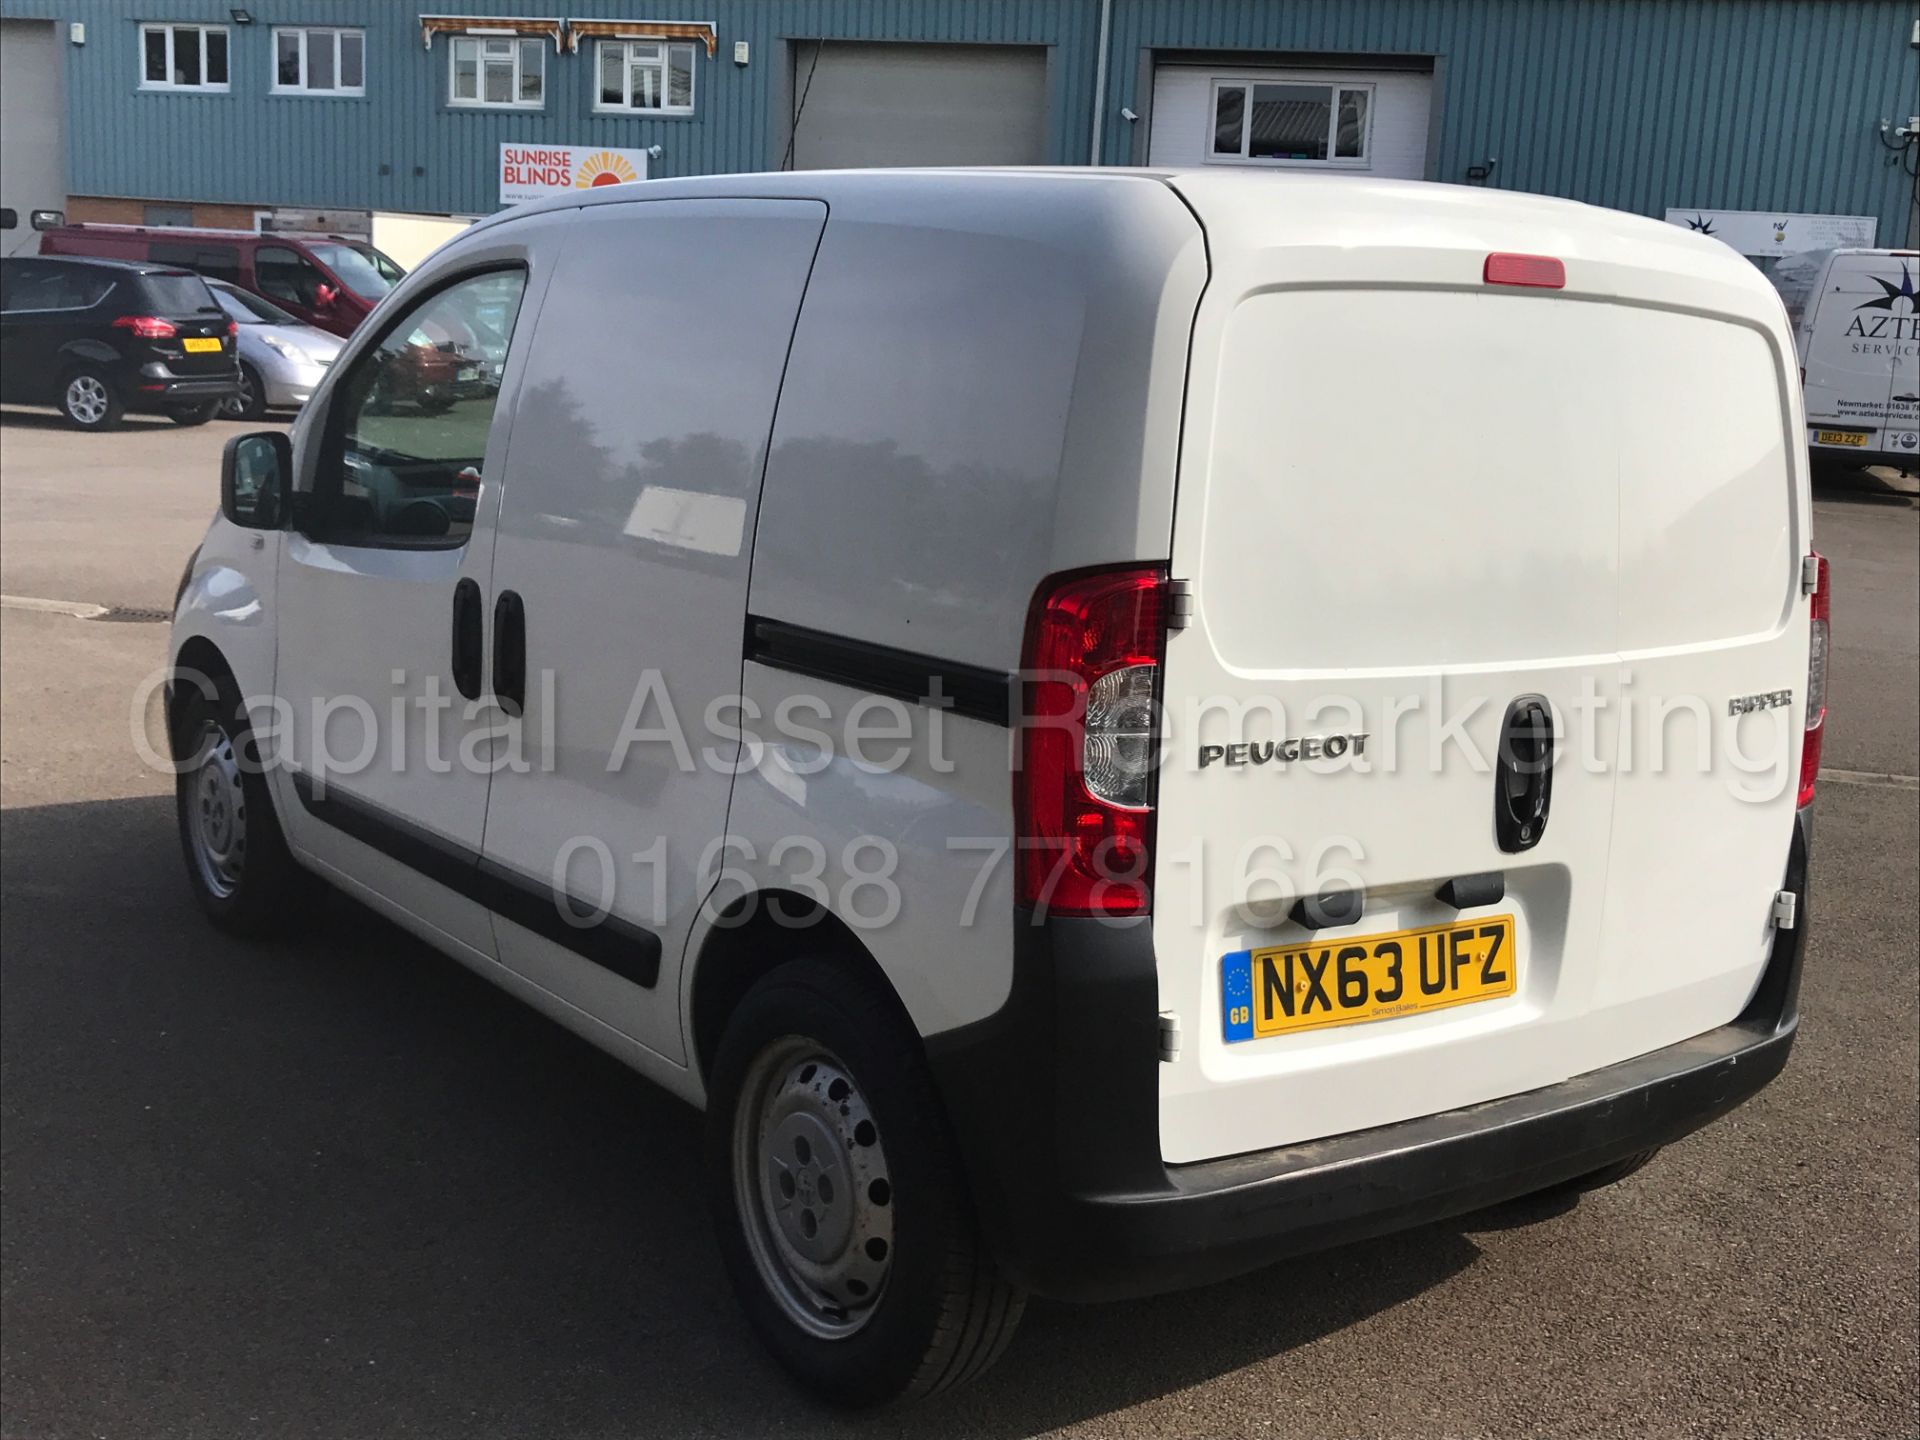 (On Sale) PEUGEOT BIPPER 'S' HDI (2014 MODEL) 'HDI - DIESEL - 5 SPEED' (1 COMPANY OWNER FROM NEW) - Image 7 of 23